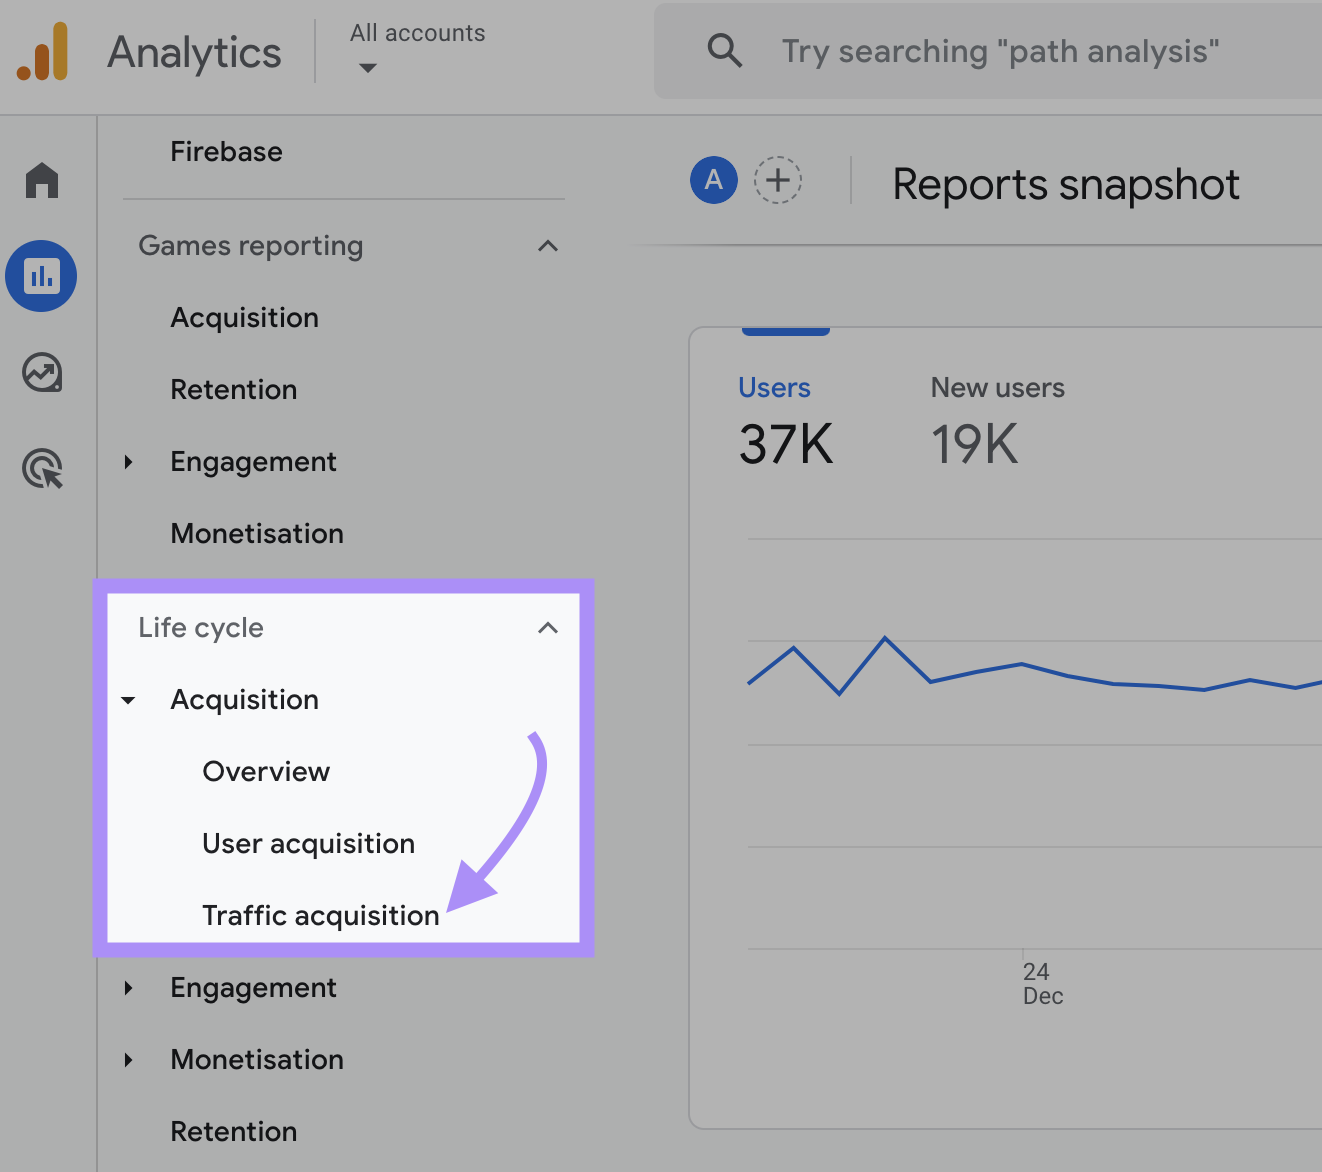 "Traffic acquisition" in the Google Analytics' left-hand navigation